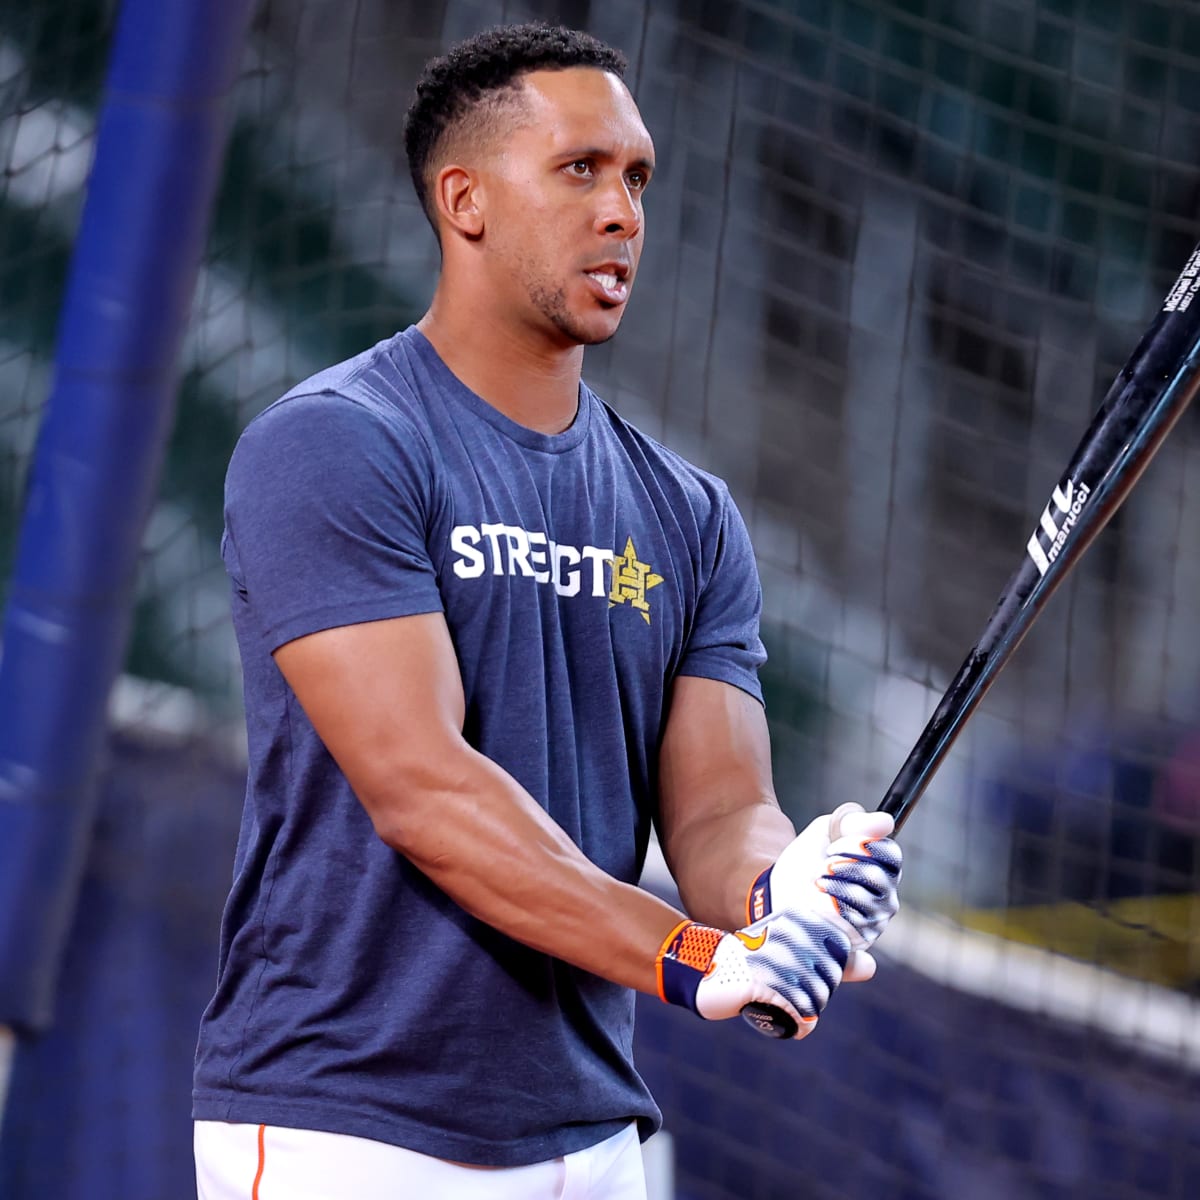 Houston Astros Welcome Back Michael Brantley from Injured List, Make  Corresponding Move - Sports Illustrated Inside The Astros